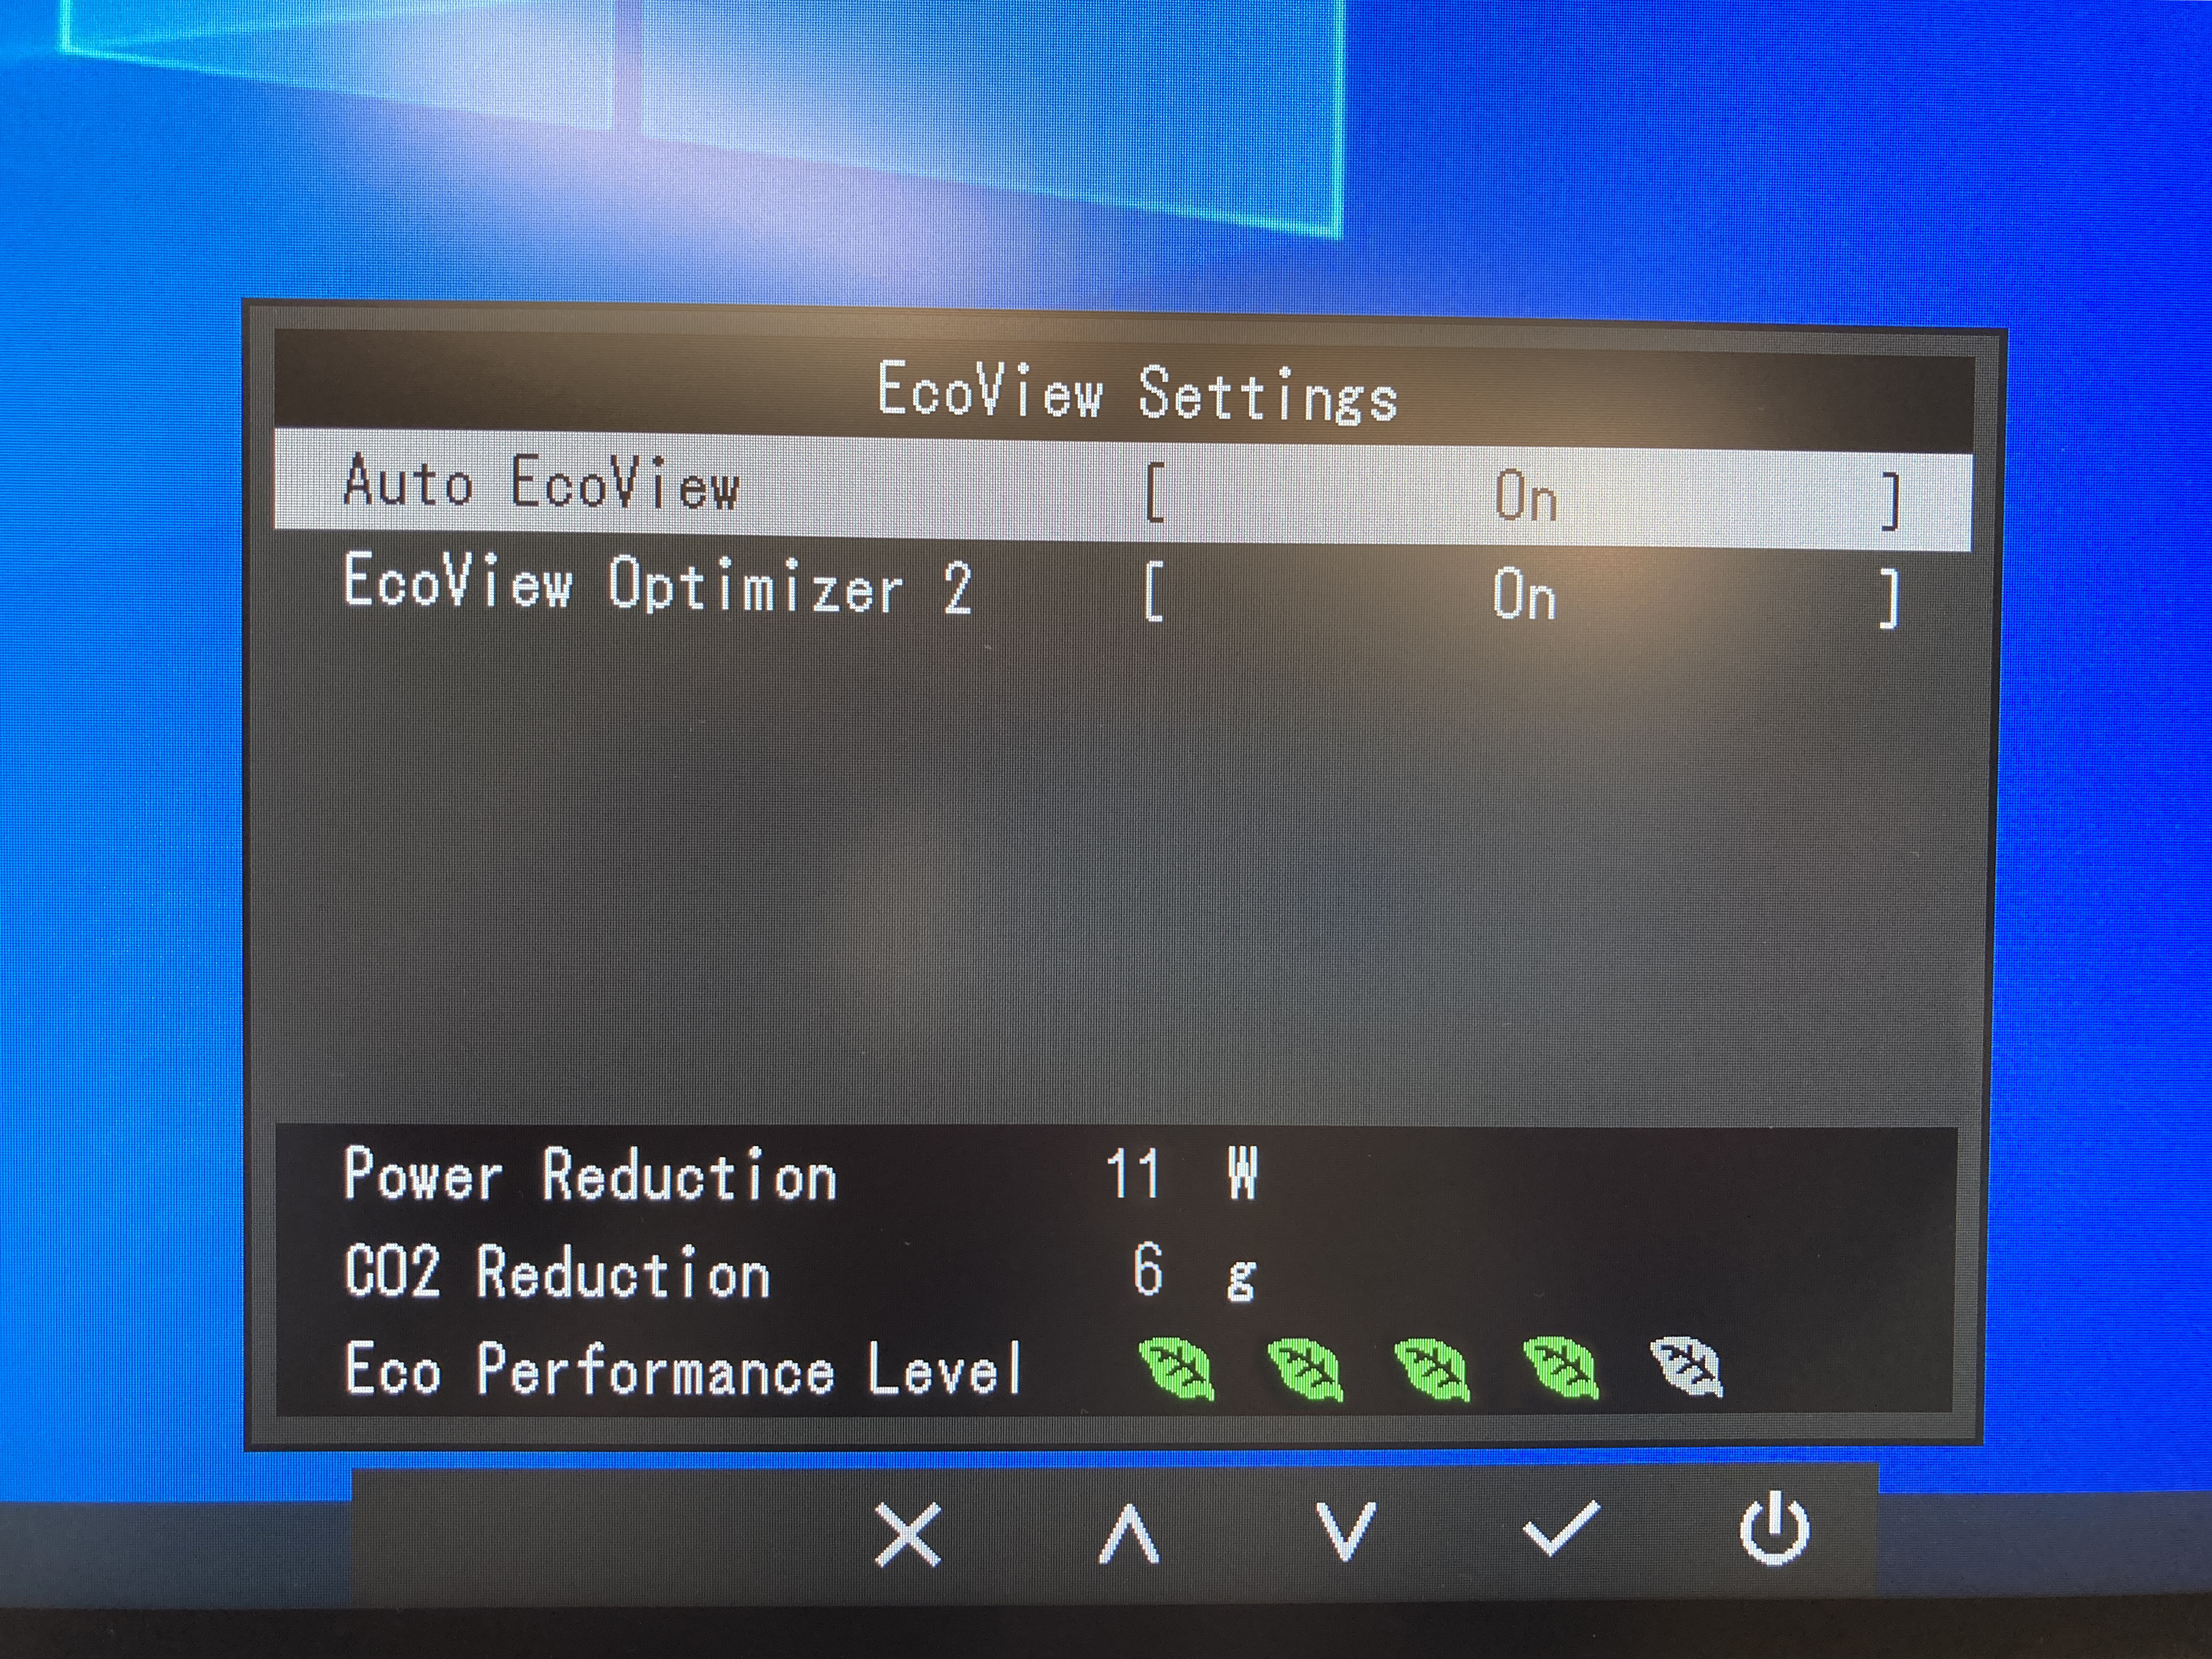 Auto EcoView and EcoView Optimizer 2 automatically adjusts the brightness to optimal levels.